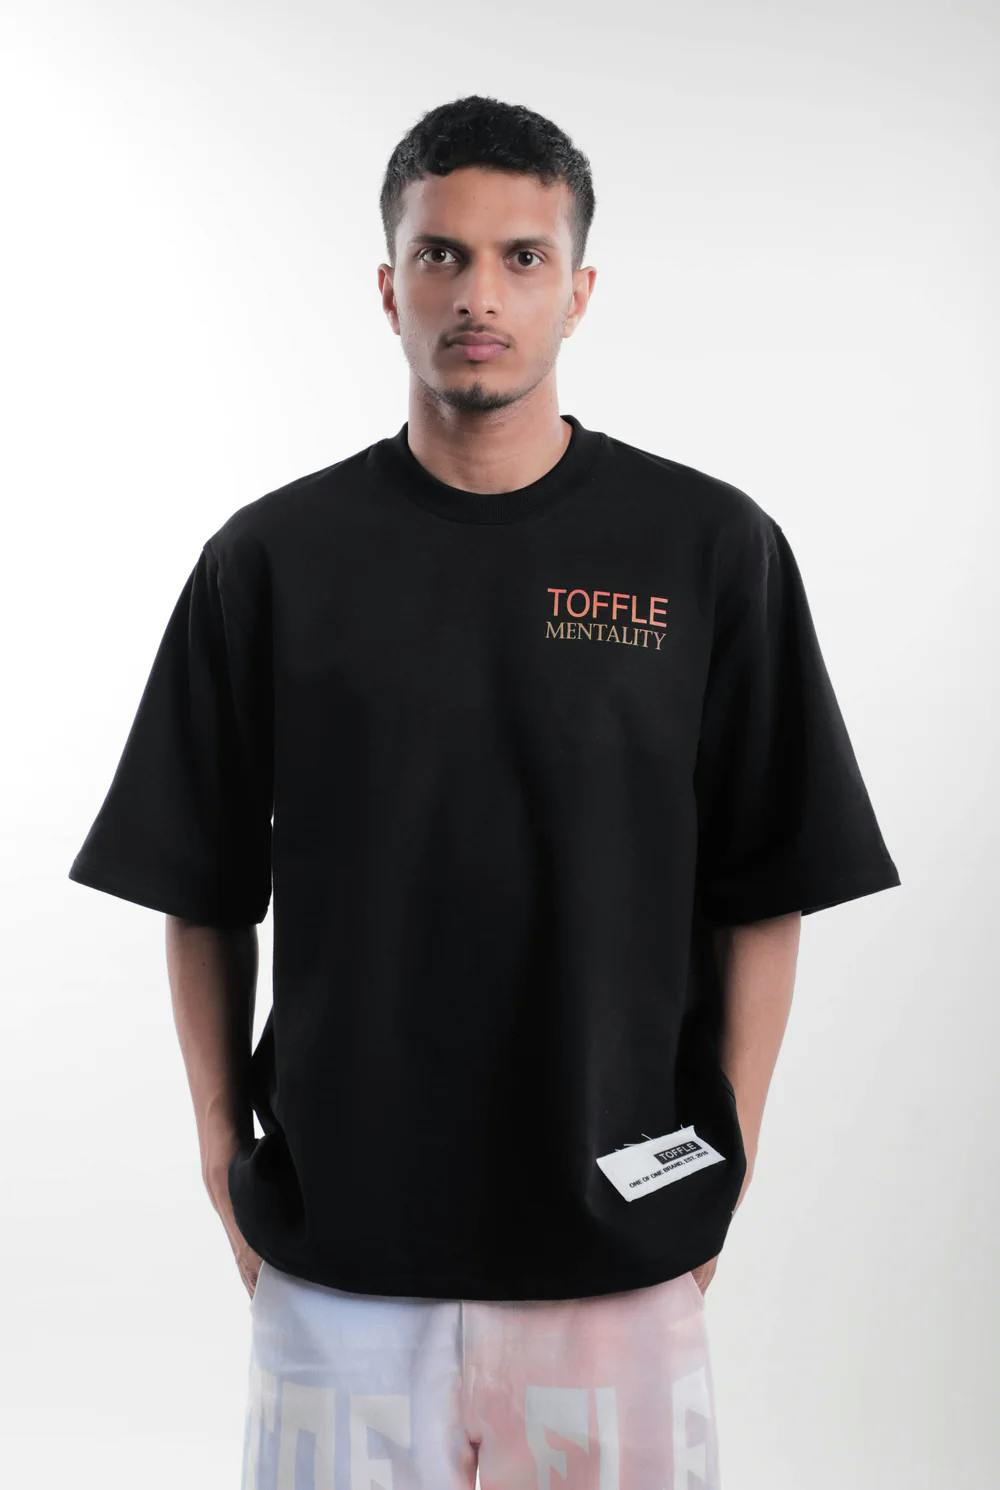 Toffle Mentality T-Shirt, a product by TOFFLE